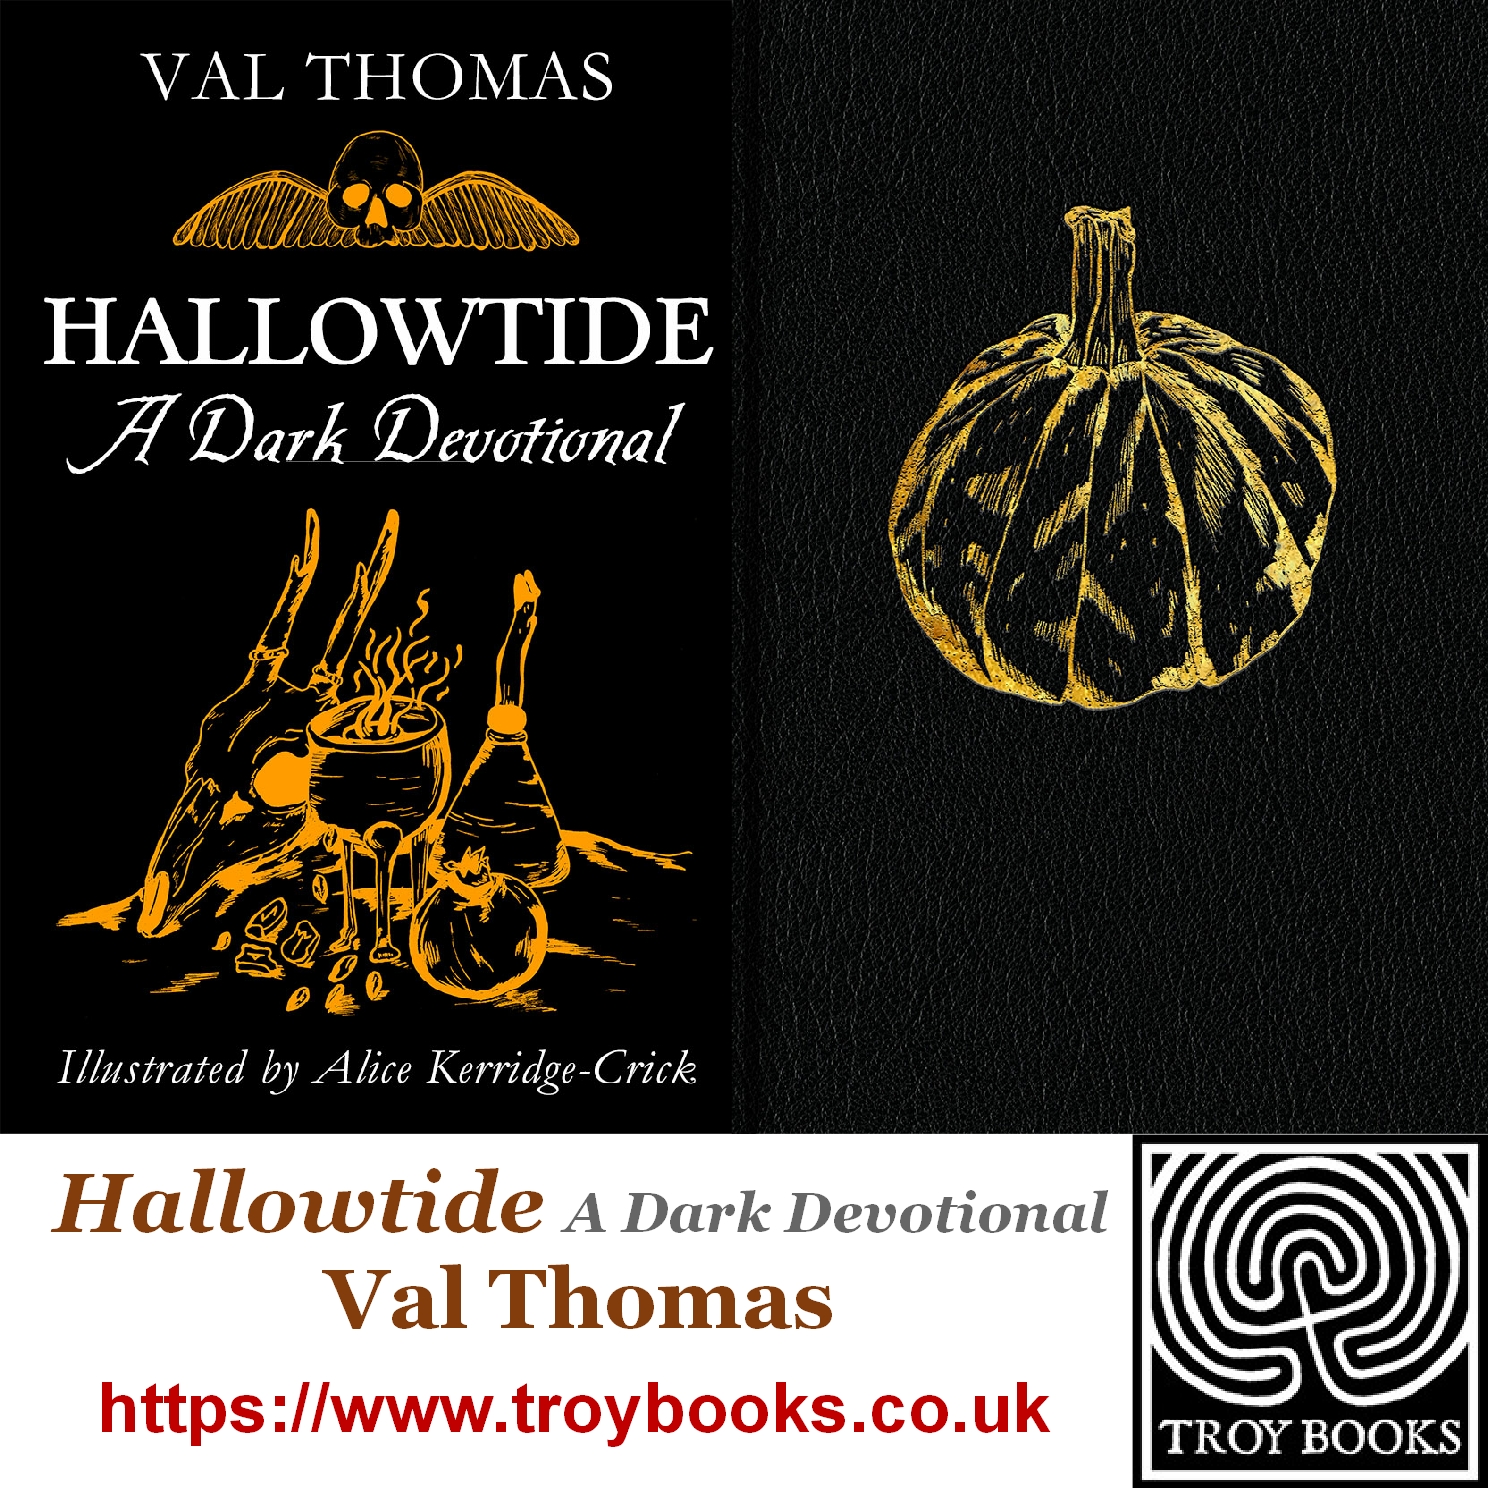 Image promoting Val's new book, with a witch's altar, a skull with wings and a pumpkin.